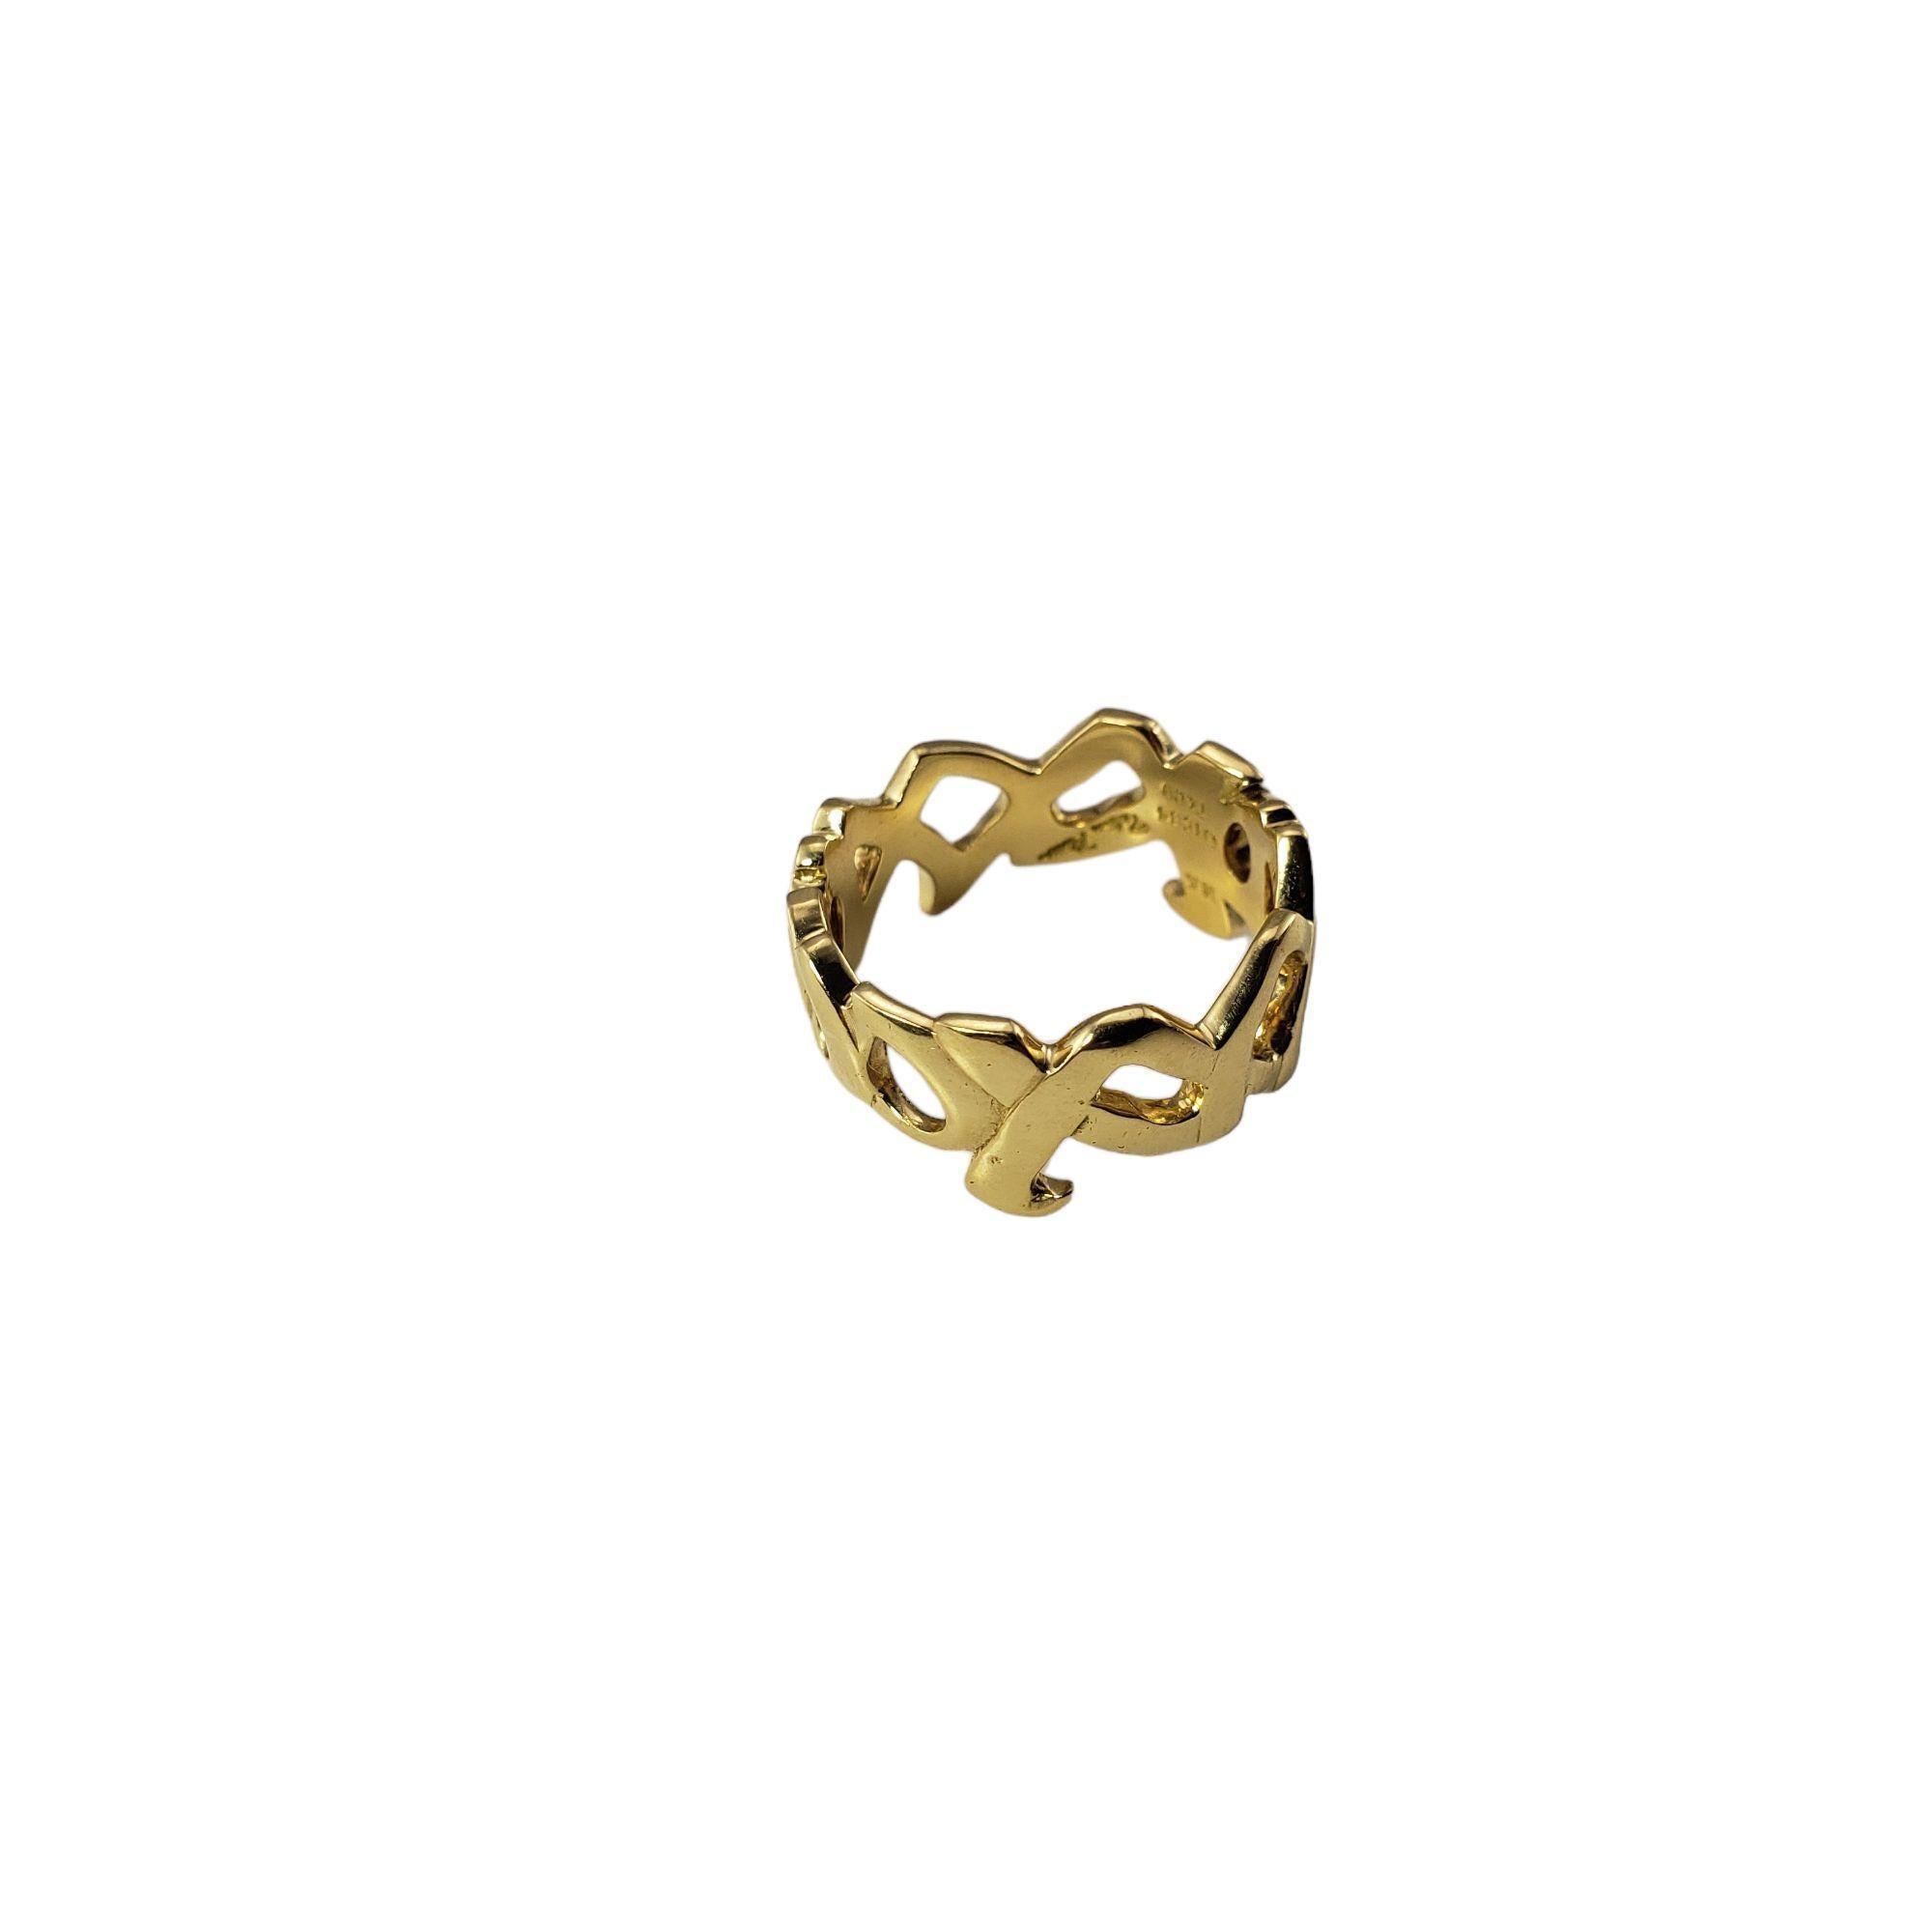 Tiffany&Co. Paloma Picasso 18K YellowGold Hugs and Kisses Ring Size 6.75 #15268 1